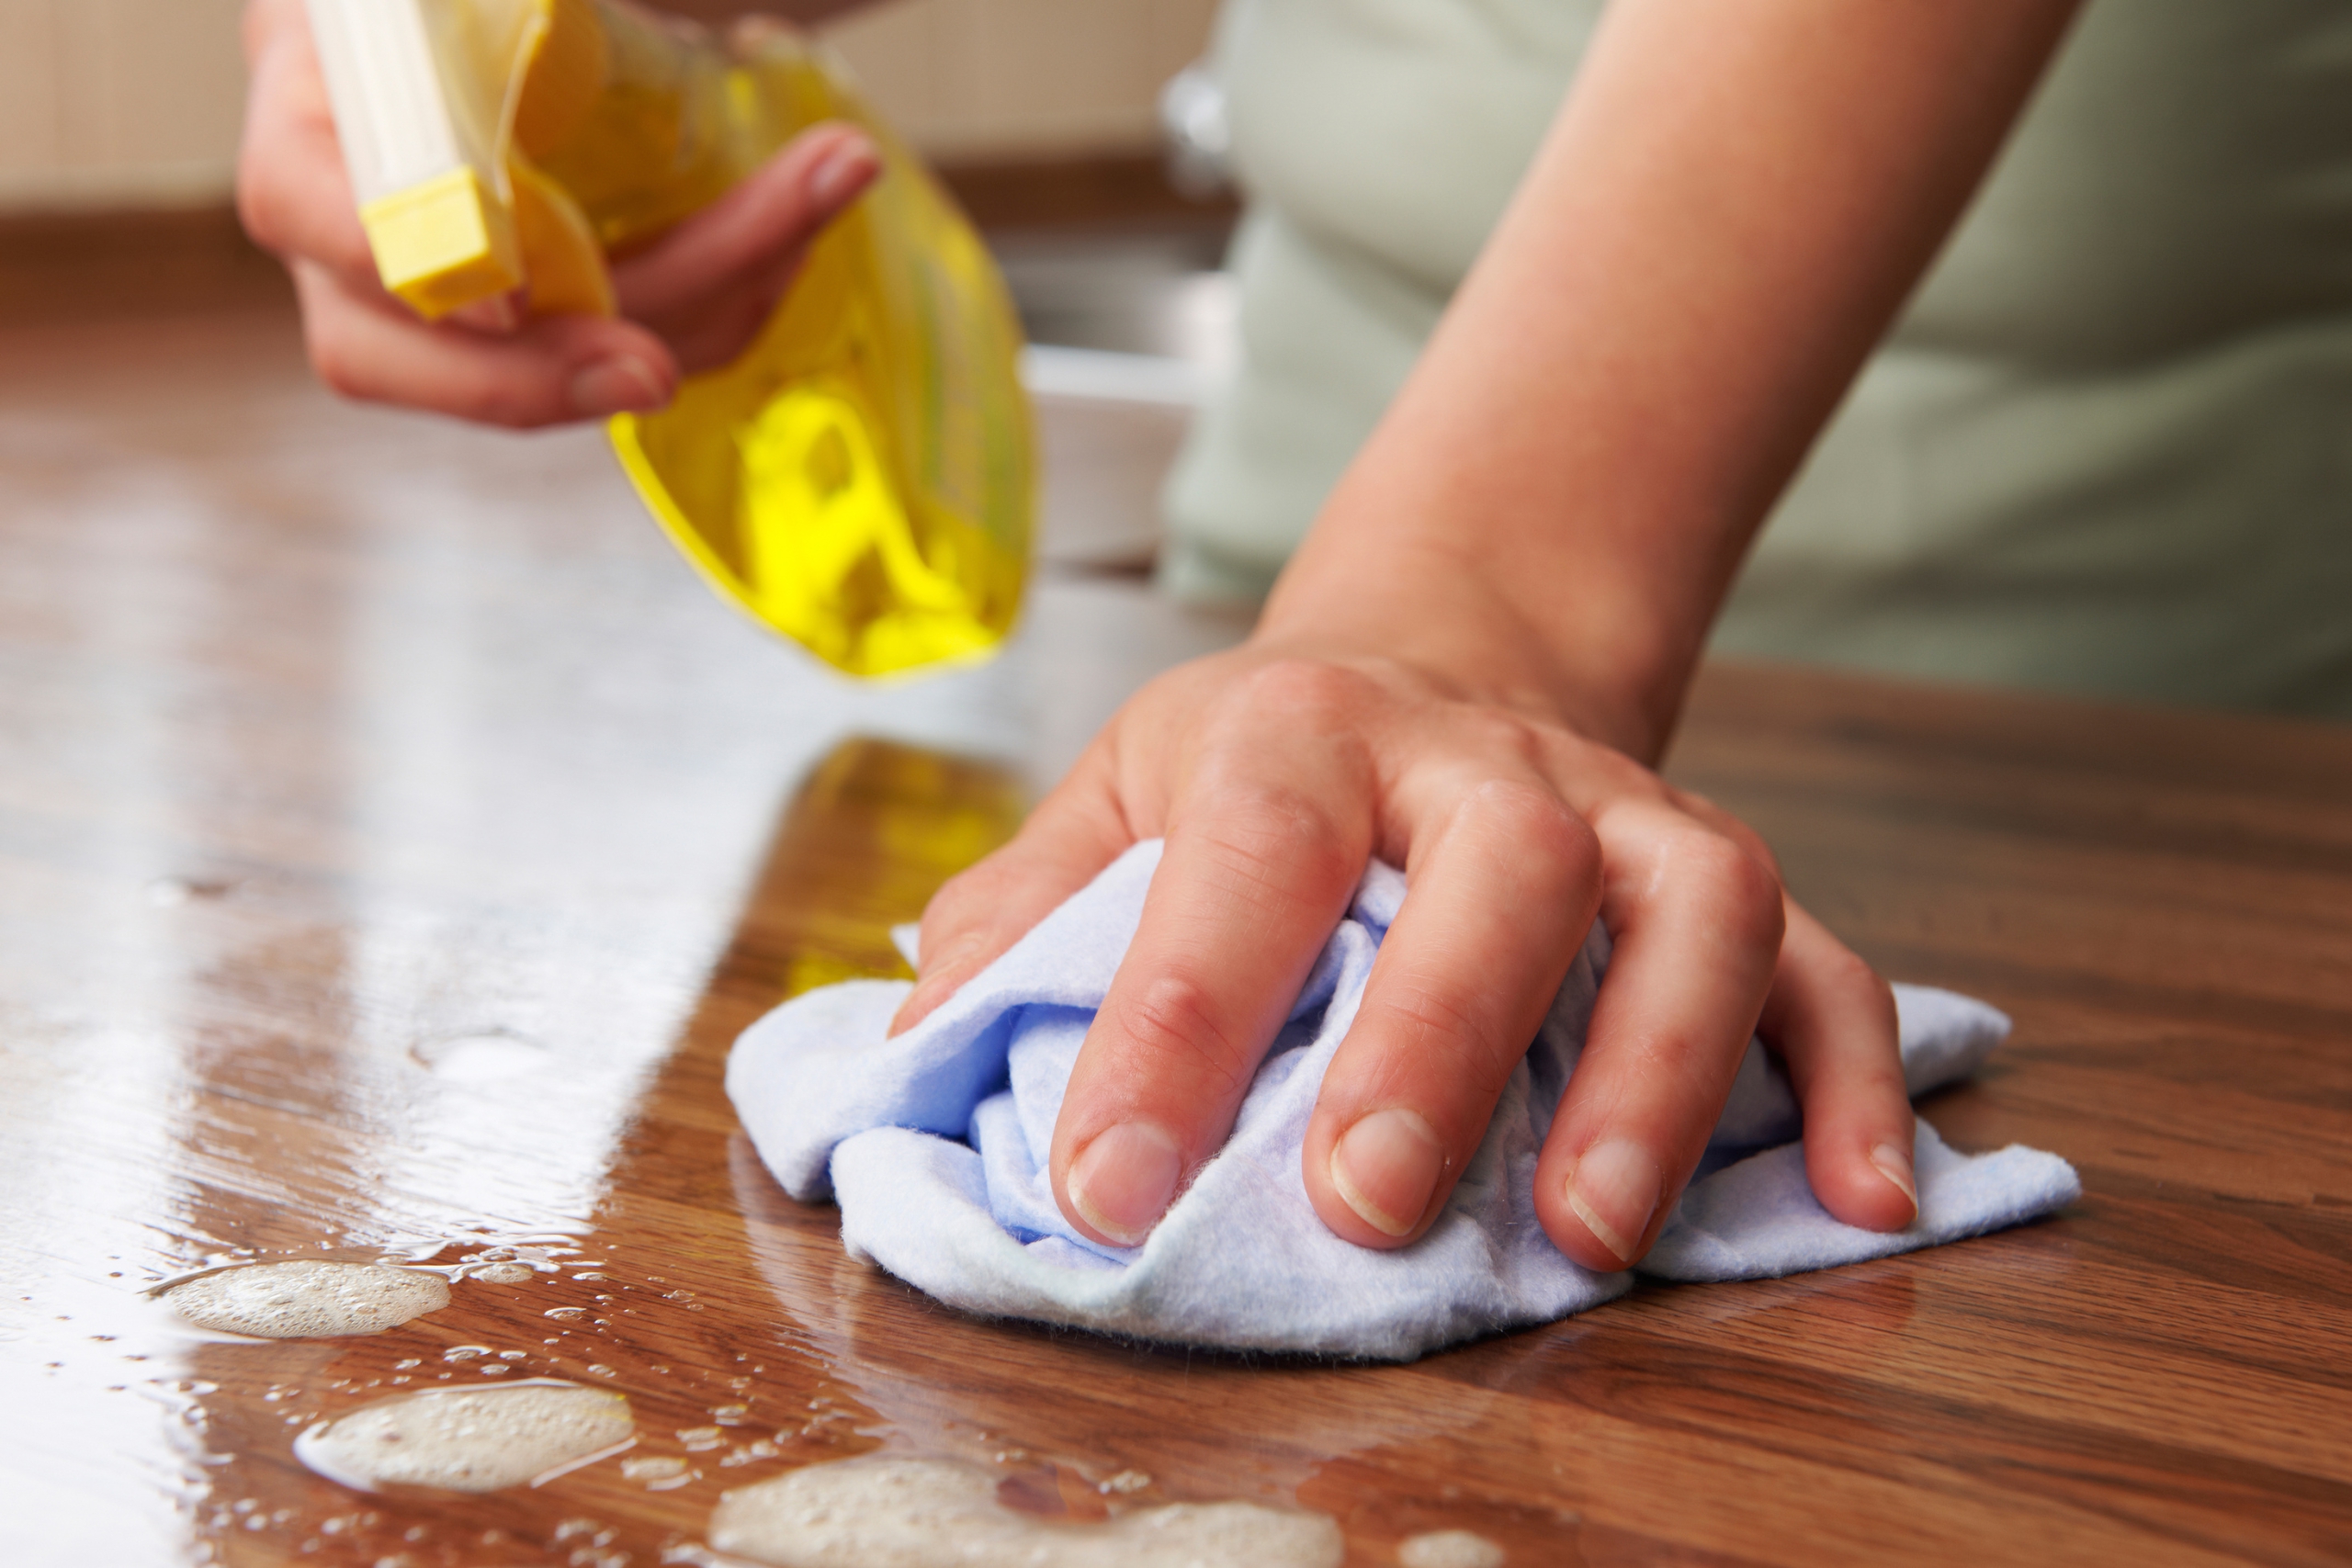 DIY House Cleaning Hacks vs. Hiring a Pro: What’s Right for You?